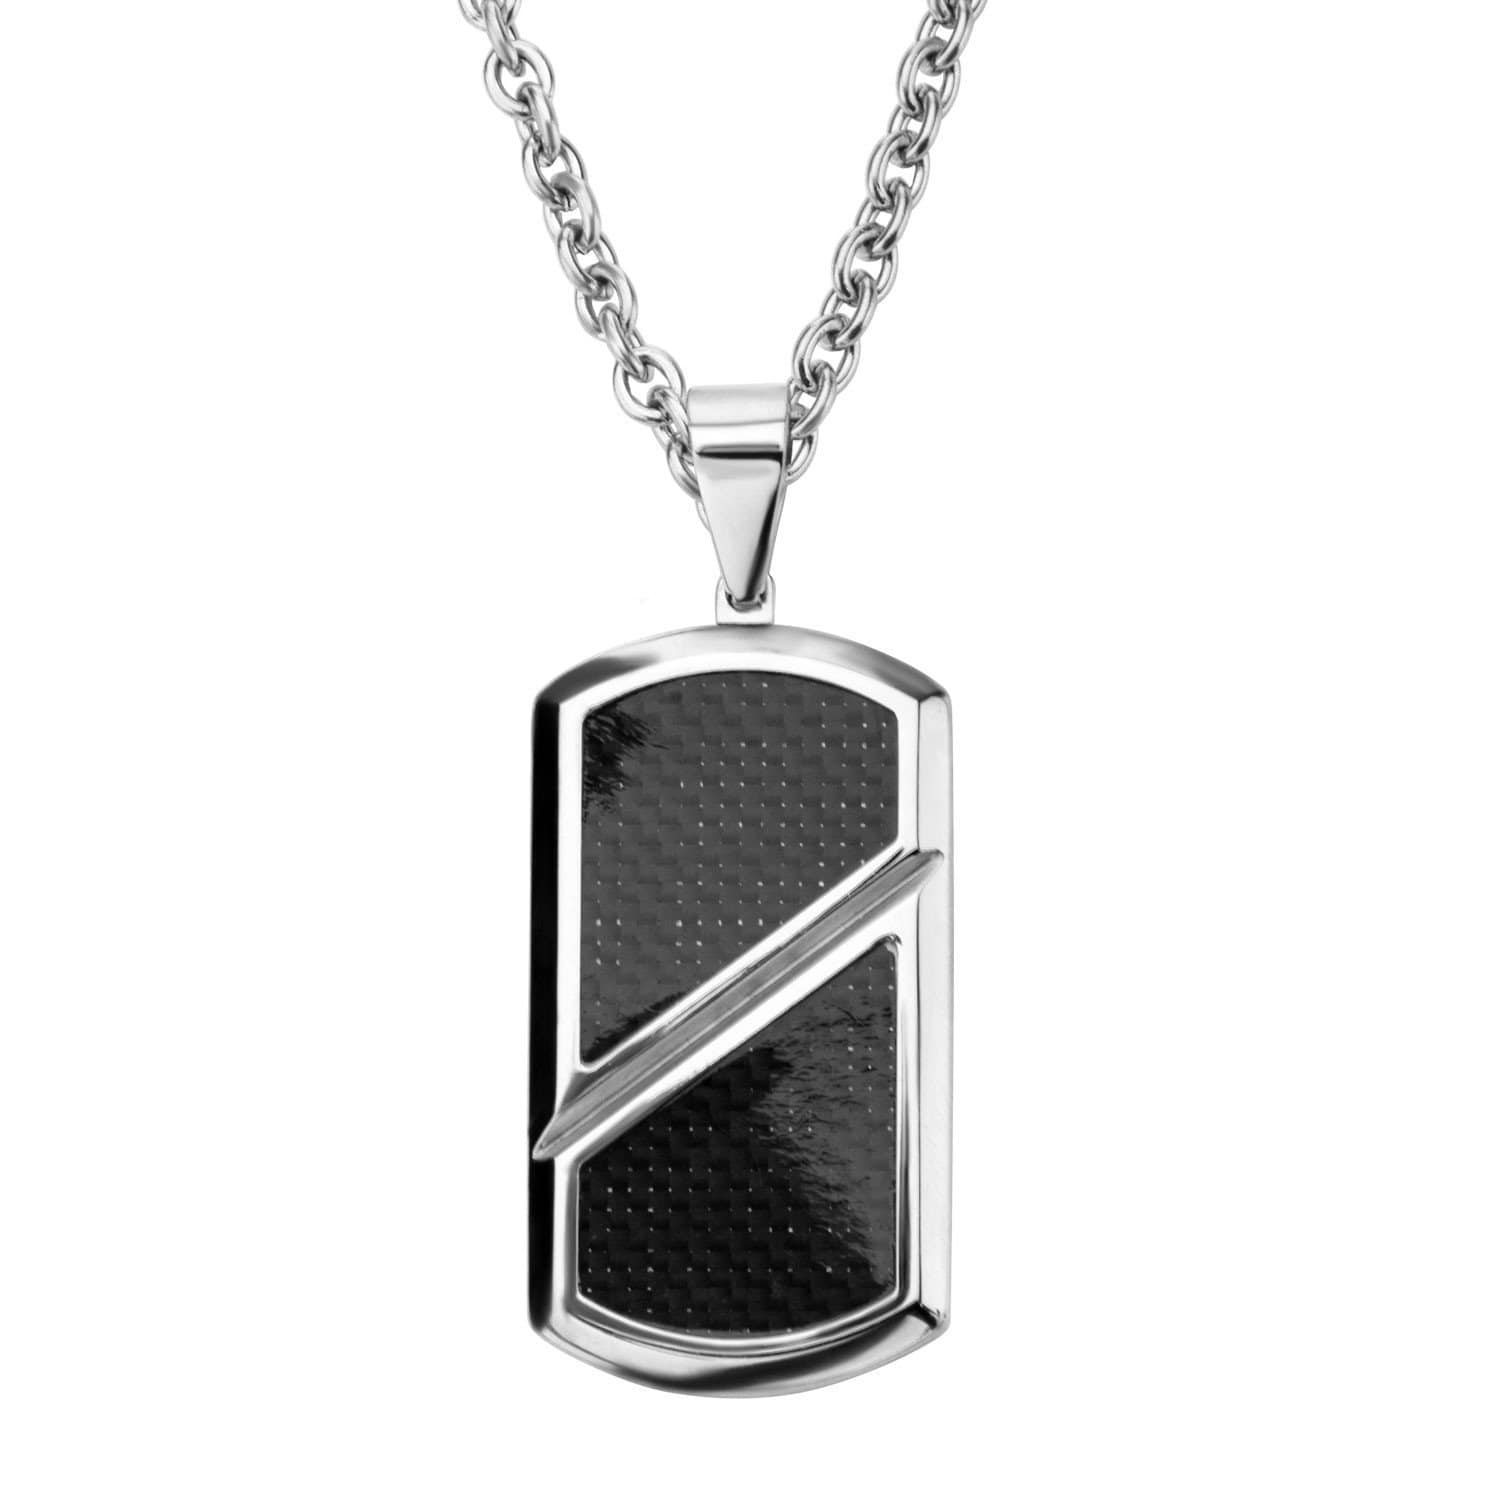 INOX JEWELRY Pendants Silver Tone Stainless Steel with Inlaid Black Carbon Fiber ID Tag SSP2409NK1